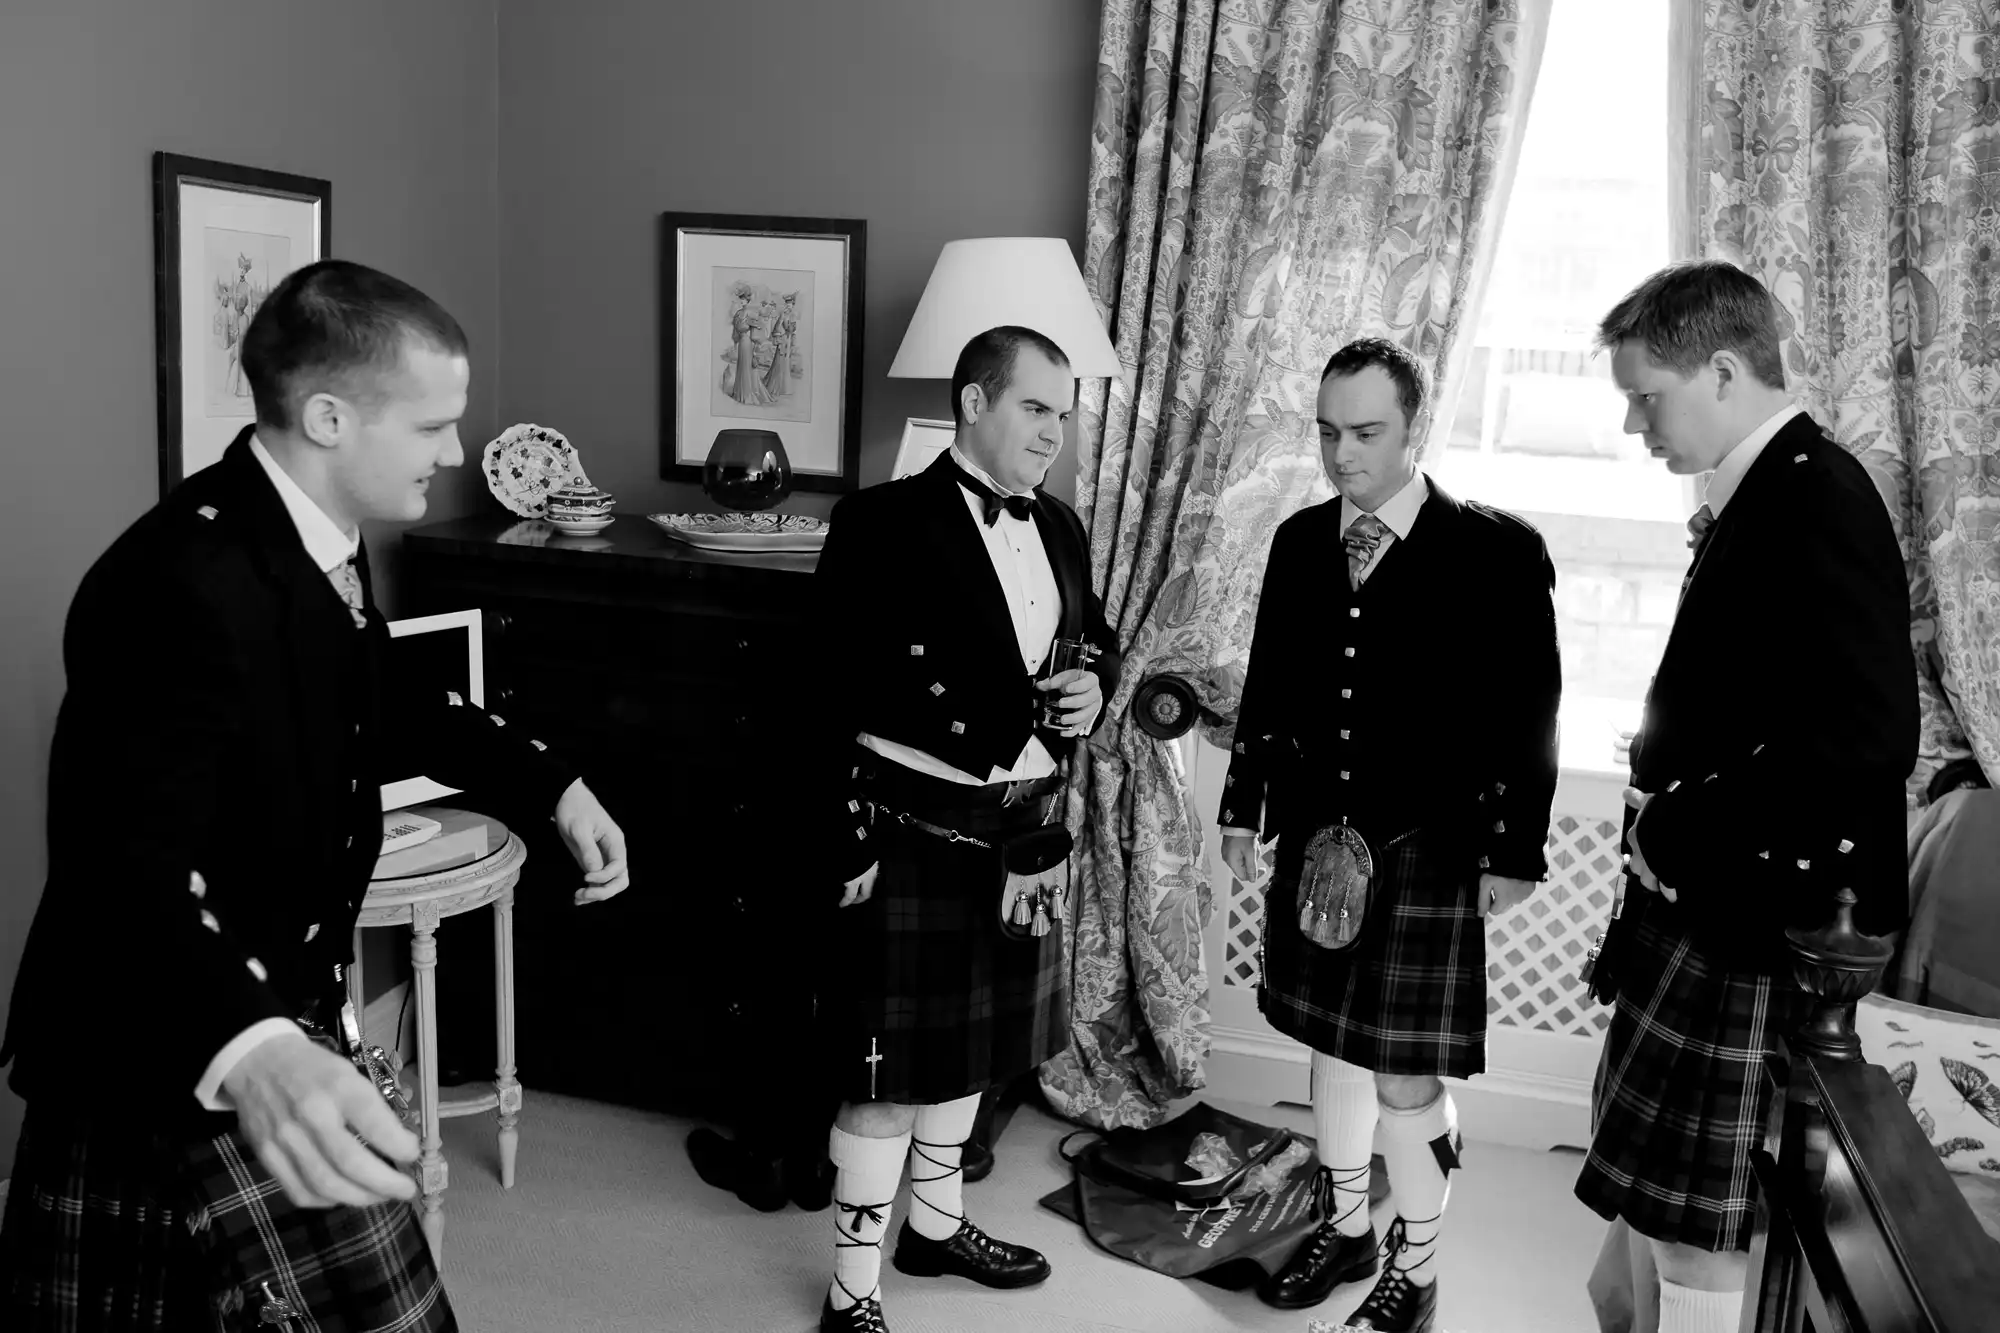 Four men in traditional kilts having a conversation in an elegantly decorated room.